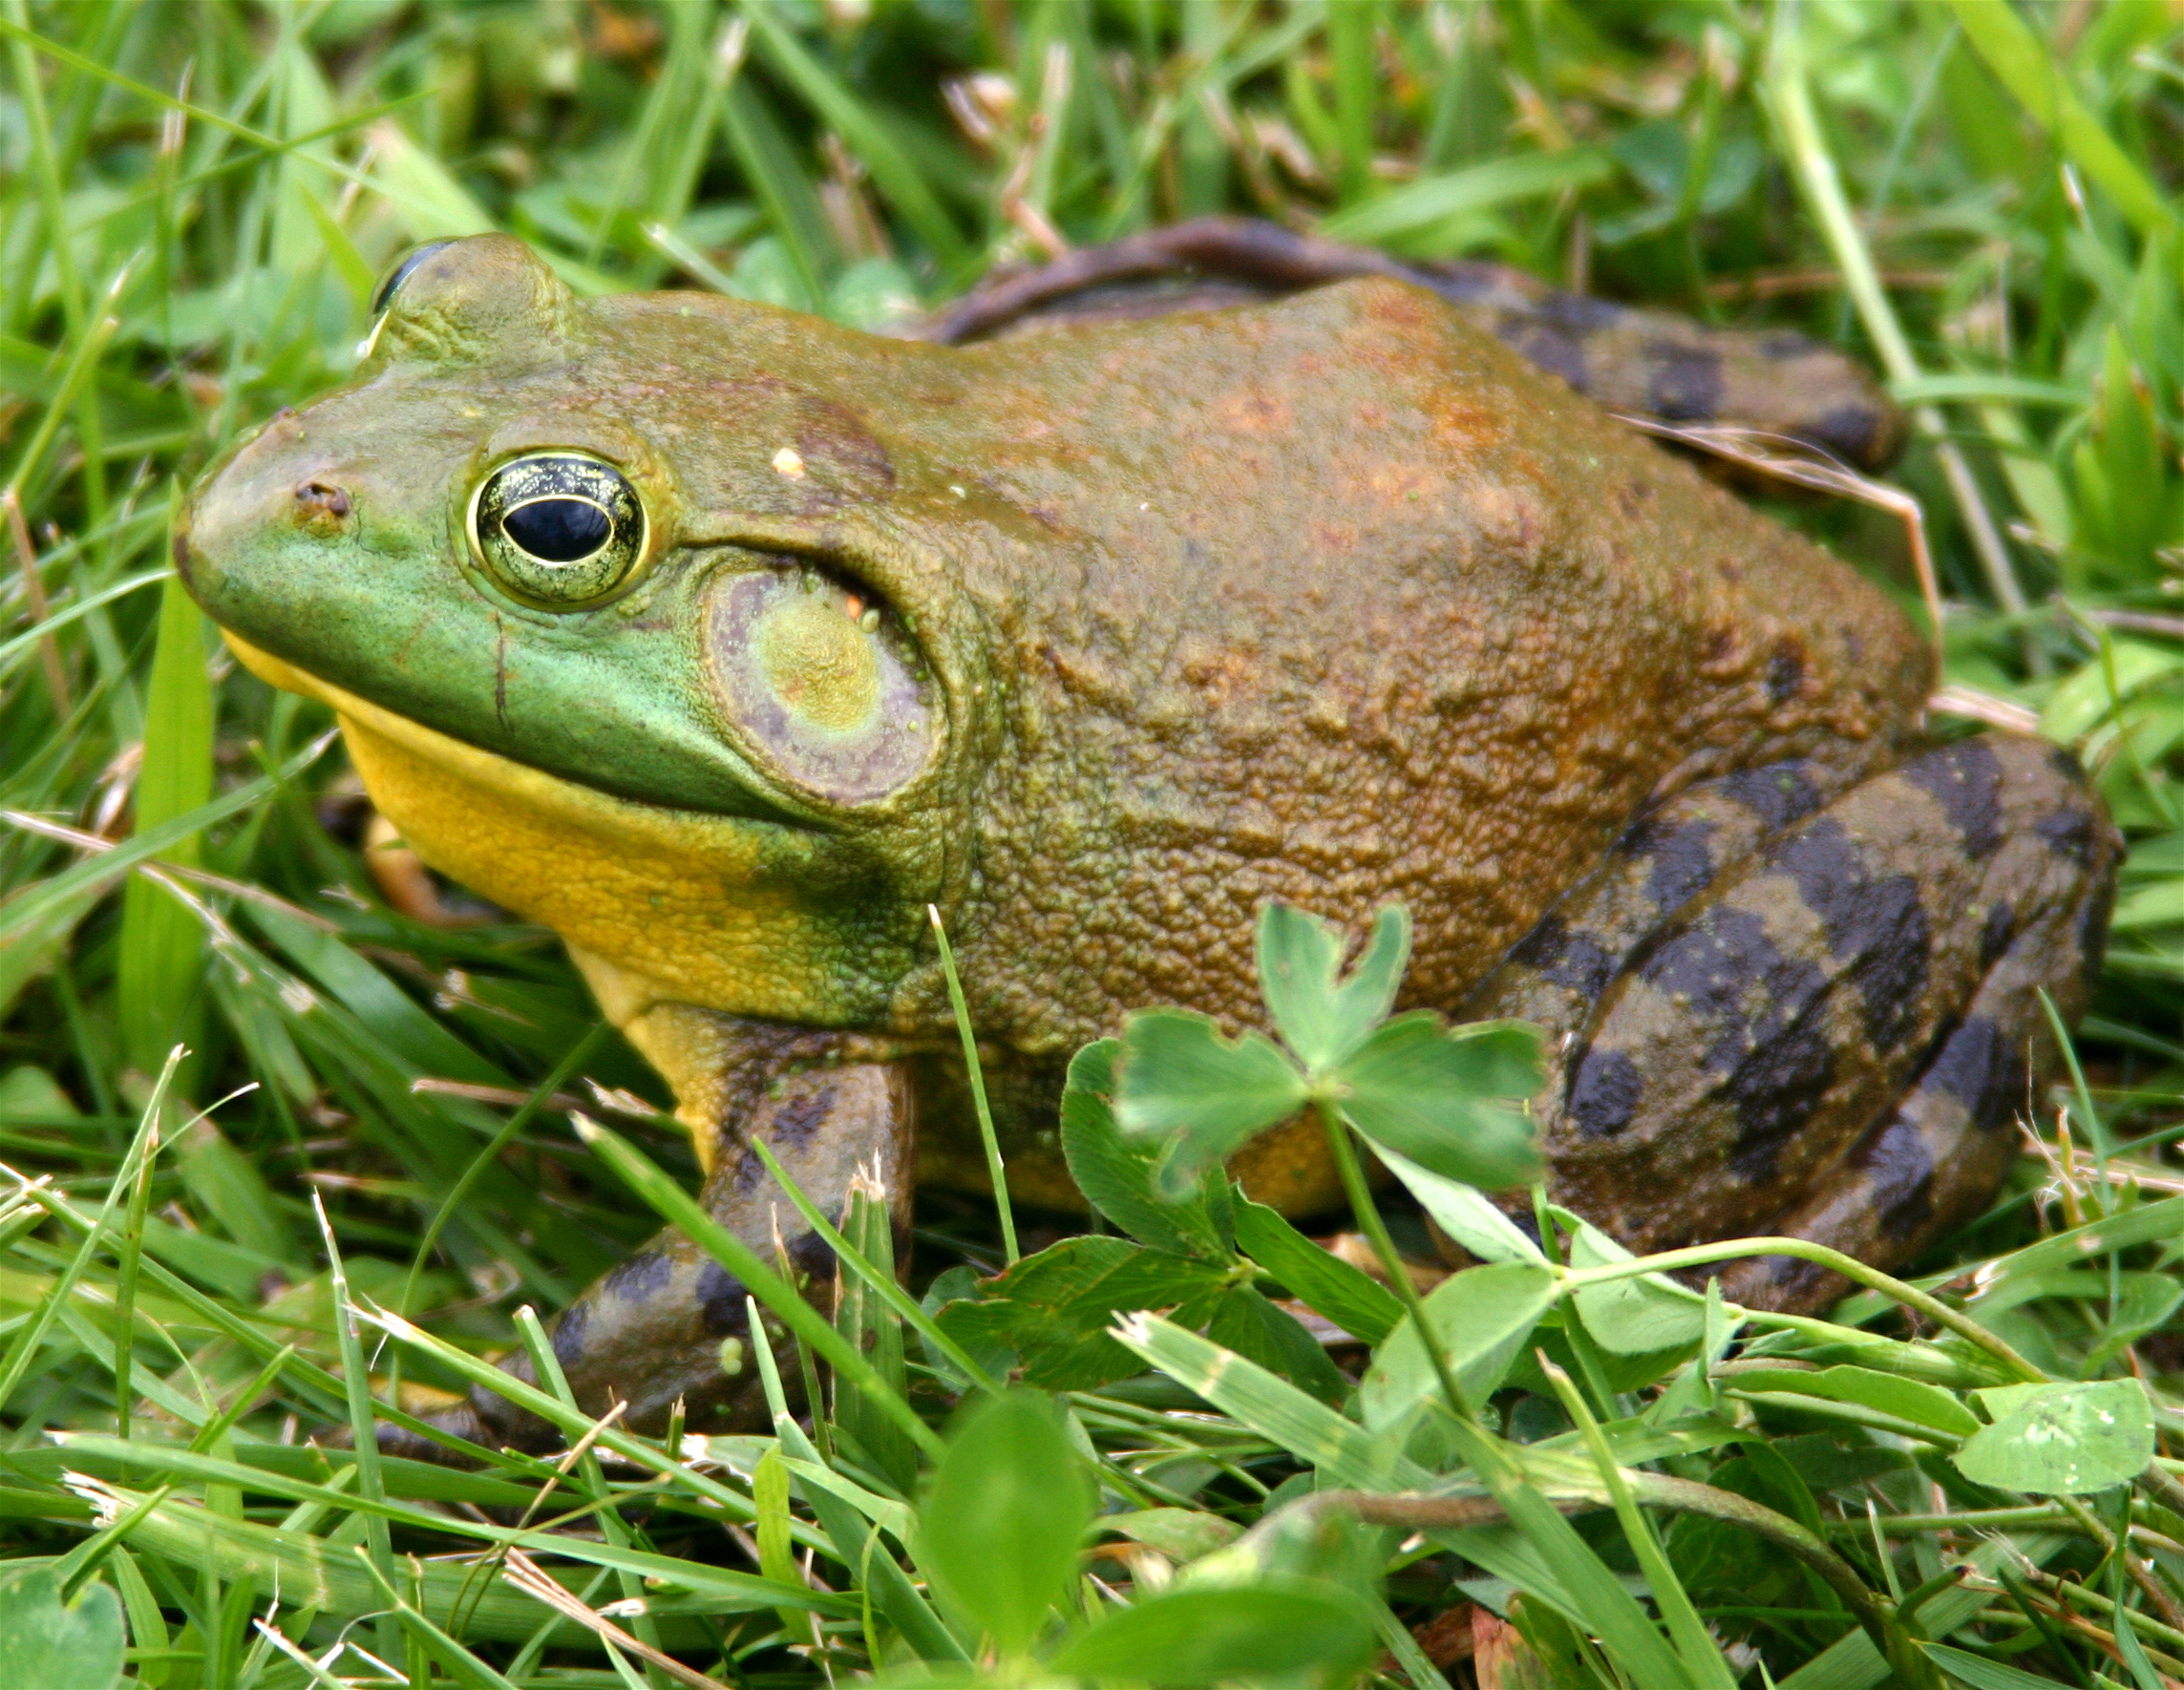 What is the scientific name of the Bullfrog?